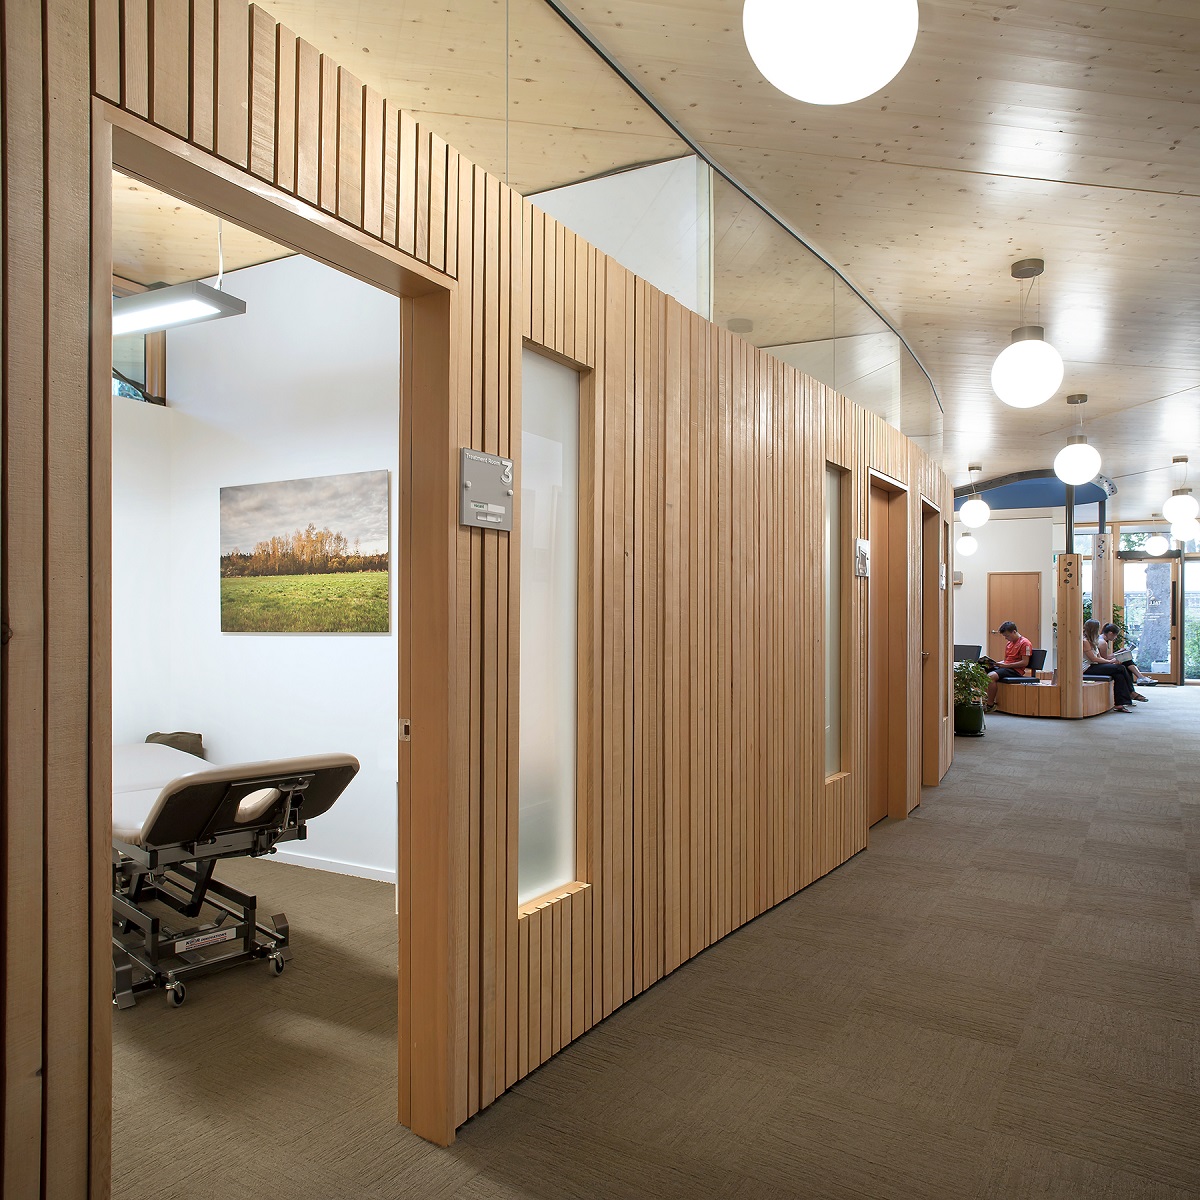 Interior daytime image highlighting extensive use of natural wood, including trim, wall panels, columns, and roof constructed from cross-laminated timber (CLT) panels within the Tall Tree Integrated Health Centre